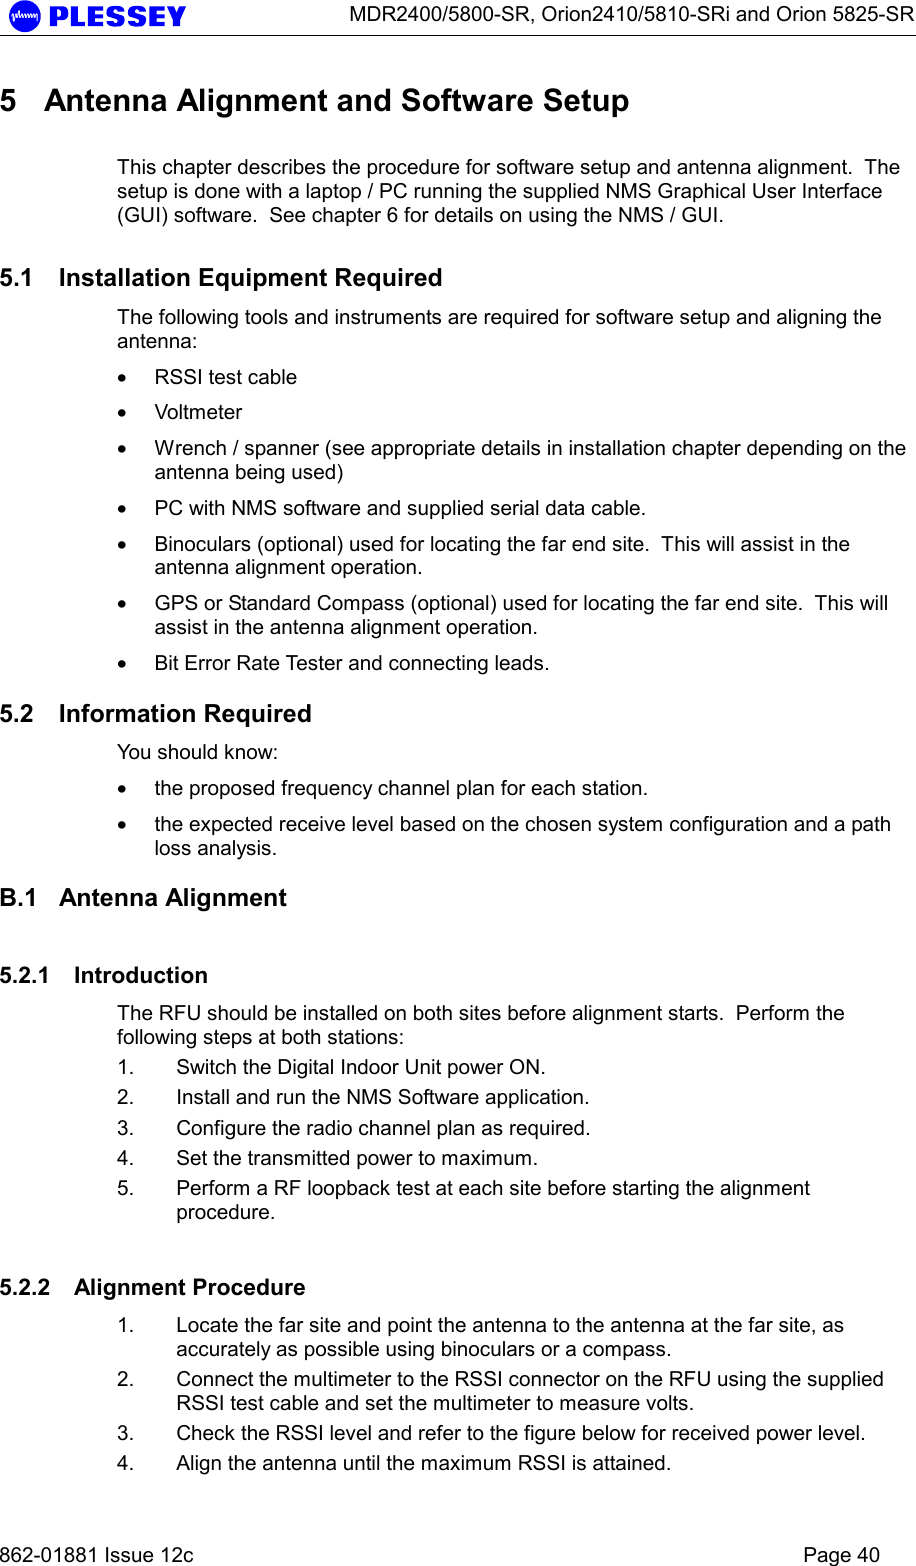      MDR2400/5800-SR, Orion2410/5810-SRi and Orion 5825-SR   862-01881 Issue 12c    Page 40 5  Antenna Alignment and Software Setup  This chapter describes the procedure for software setup and antenna alignment.  The setup is done with a laptop / PC running the supplied NMS Graphical User Interface (GUI) software.  See chapter 6 for details on using the NMS / GUI.  5.1  Installation Equipment Required The following tools and instruments are required for software setup and aligning the antenna: • RSSI test cable • Voltmeter • Wrench / spanner (see appropriate details in installation chapter depending on the antenna being used) • PC with NMS software and supplied serial data cable. • Binoculars (optional) used for locating the far end site.  This will assist in the antenna alignment operation. • GPS or Standard Compass (optional) used for locating the far end site.  This will assist in the antenna alignment operation. • Bit Error Rate Tester and connecting leads.  5.2 Information Required You should know: • the proposed frequency channel plan for each station.   • the expected receive level based on the chosen system configuration and a path loss analysis.  B.1 Antenna Alignment 5.2.1 Introduction The RFU should be installed on both sites before alignment starts.  Perform the following steps at both stations: 1.  Switch the Digital Indoor Unit power ON.  2.  Install and run the NMS Software application. 3.  Configure the radio channel plan as required. 4.  Set the transmitted power to maximum. 5.  Perform a RF loopback test at each site before starting the alignment procedure. 5.2.2 Alignment Procedure 1.  Locate the far site and point the antenna to the antenna at the far site, as accurately as possible using binoculars or a compass. 2.  Connect the multimeter to the RSSI connector on the RFU using the supplied RSSI test cable and set the multimeter to measure volts. 3.  Check the RSSI level and refer to the figure below for received power level. 4.  Align the antenna until the maximum RSSI is attained. 